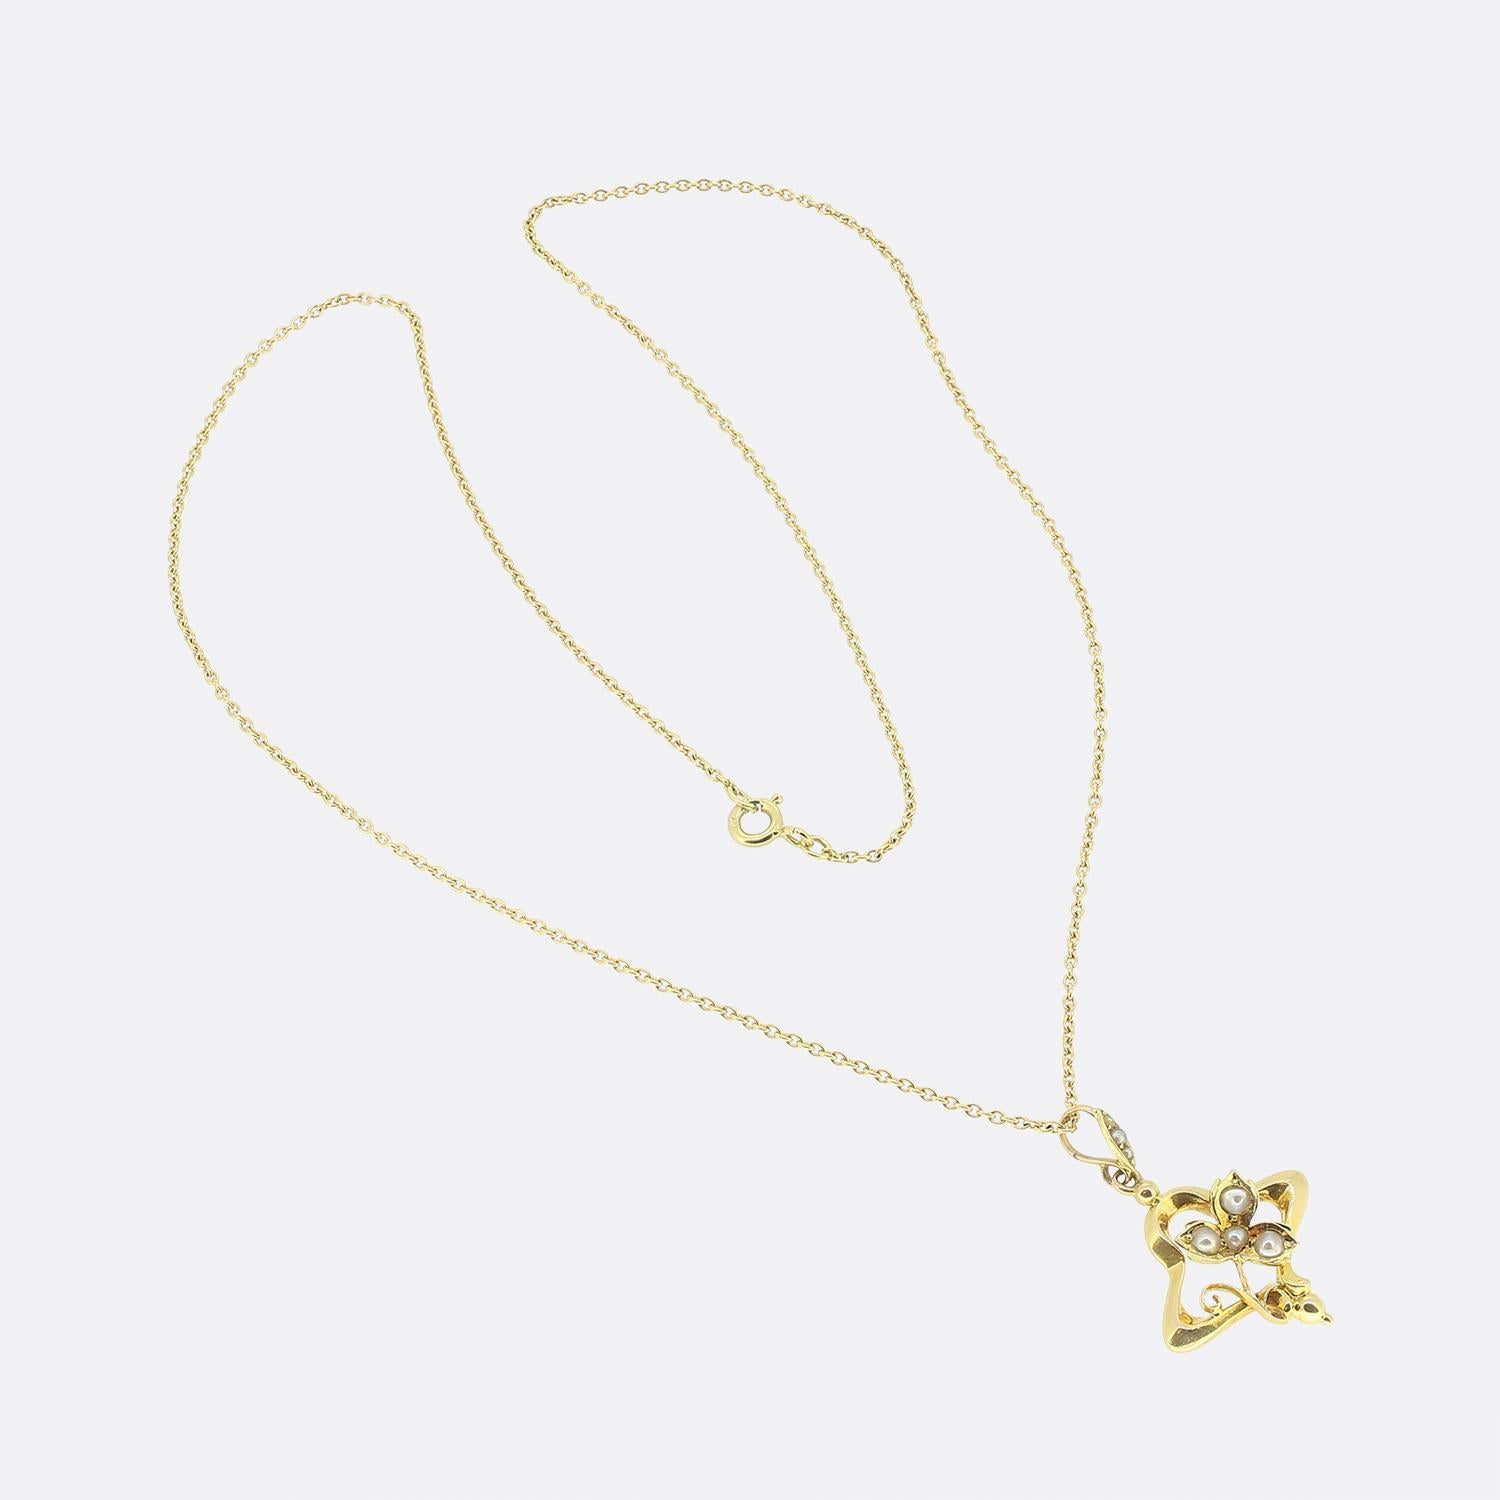 Here we have a lovely pearl set pendant necklace. This antique pendant has been crafted from 15ct yellow gold with an open framework playing host to a clover motif at the centre; each leaf of which is set with a single round shaped natural pearl. A